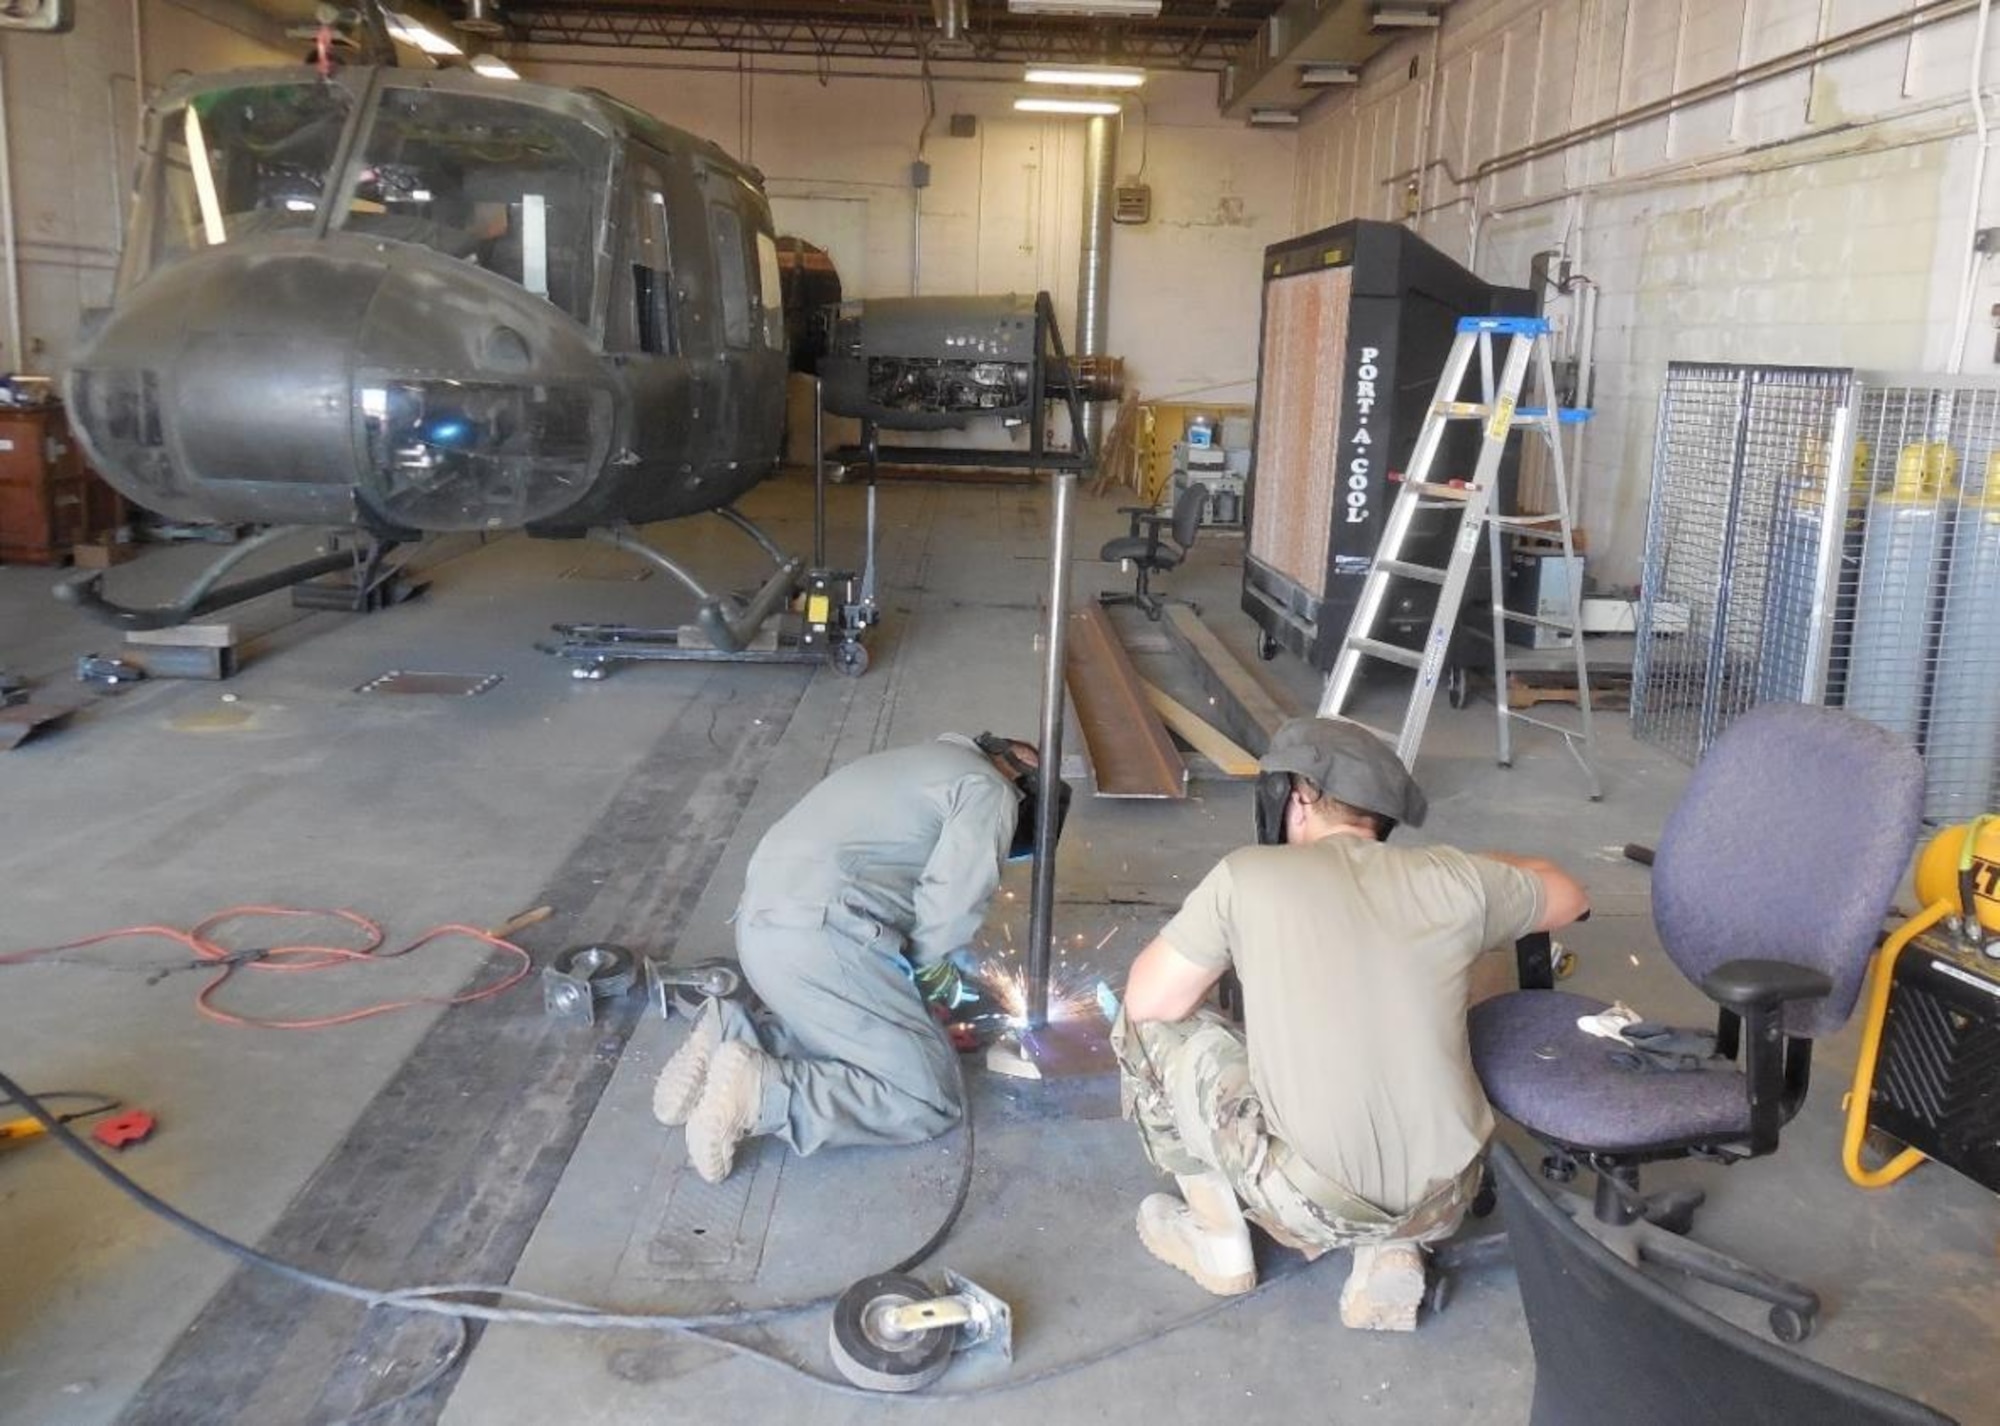 A member of the 210th RED HORSE team (left) welds a wheel caster in July while another member looks on. The wheel caster aided in the transport of the UH-1 helicopter airframe pictured in the background. The airframe was relocated to the DNWS training site on base to be used as a training aid. Members spent a couple of weeks fabricating the casters provided by DNWS and rotated throughout the project to acquire metal cutting, welding and fabrication skills. (Photo by Matt Thompson)